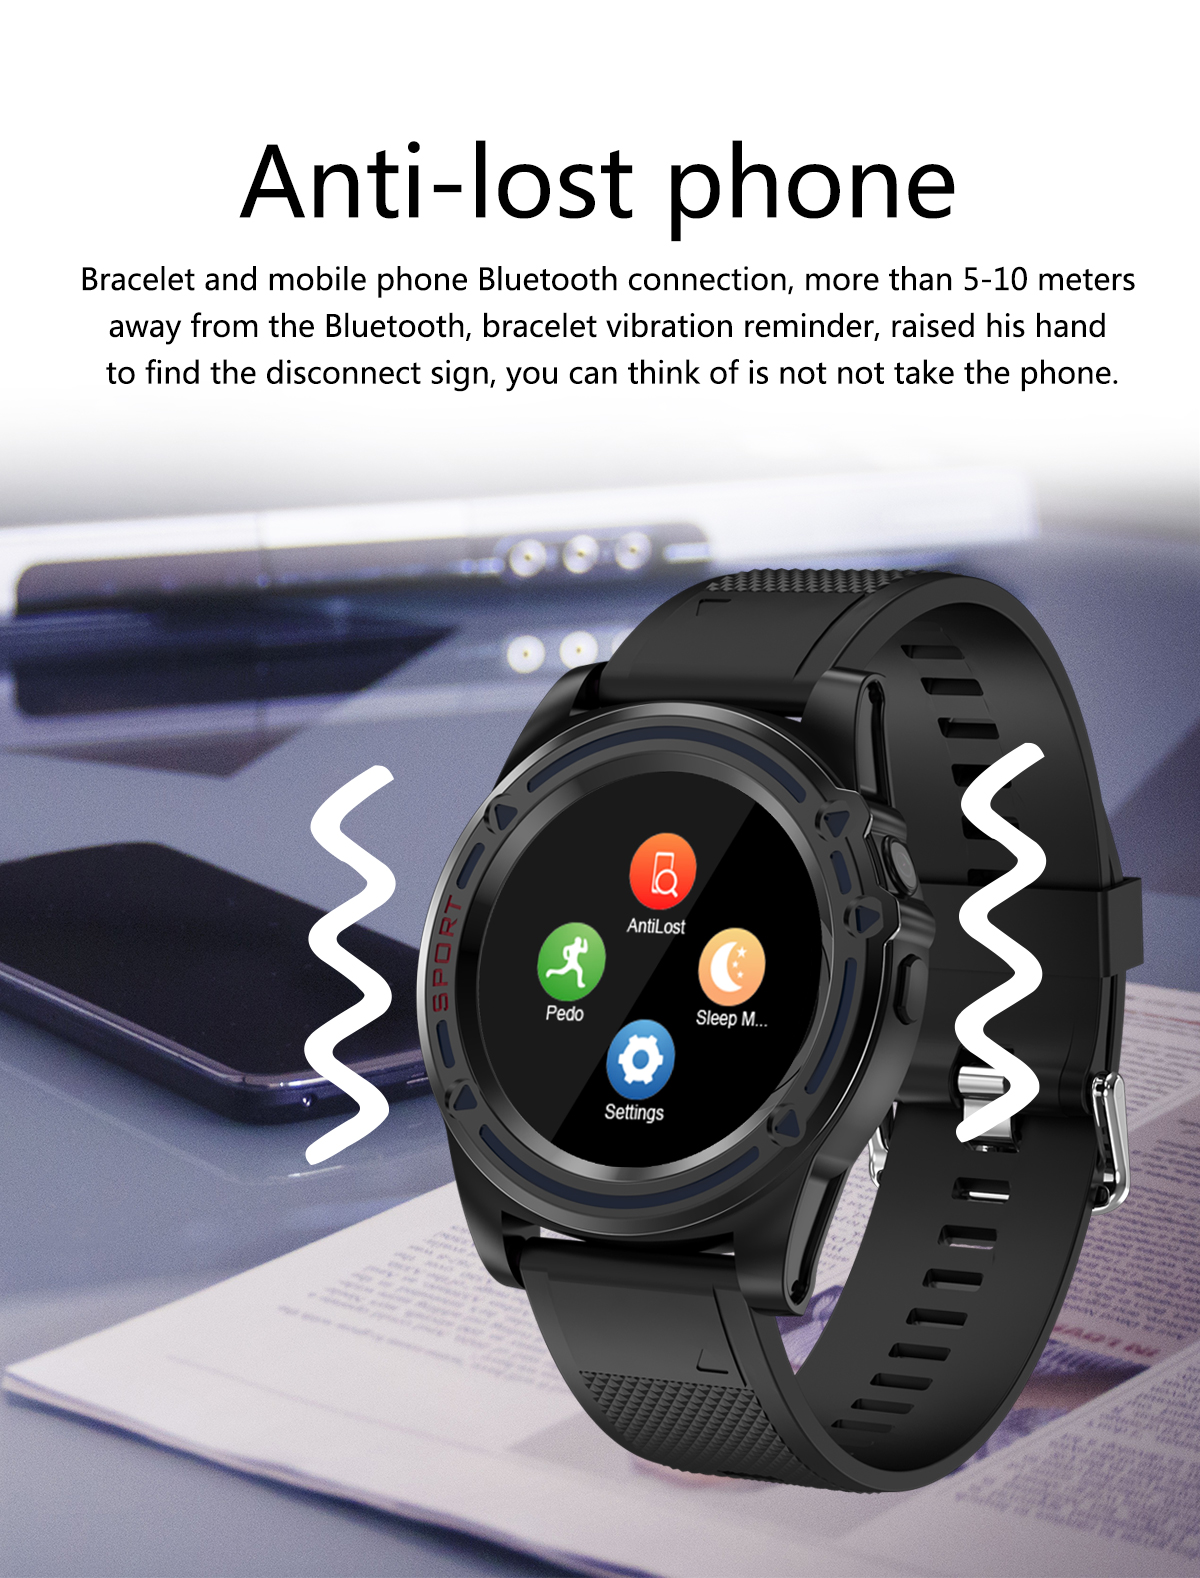 Bluetooth DT18 GSM Smart Watch Relogio Android Smartwatch Phone Call SIM TF Camera Smart Watch Hombre For Android IOS